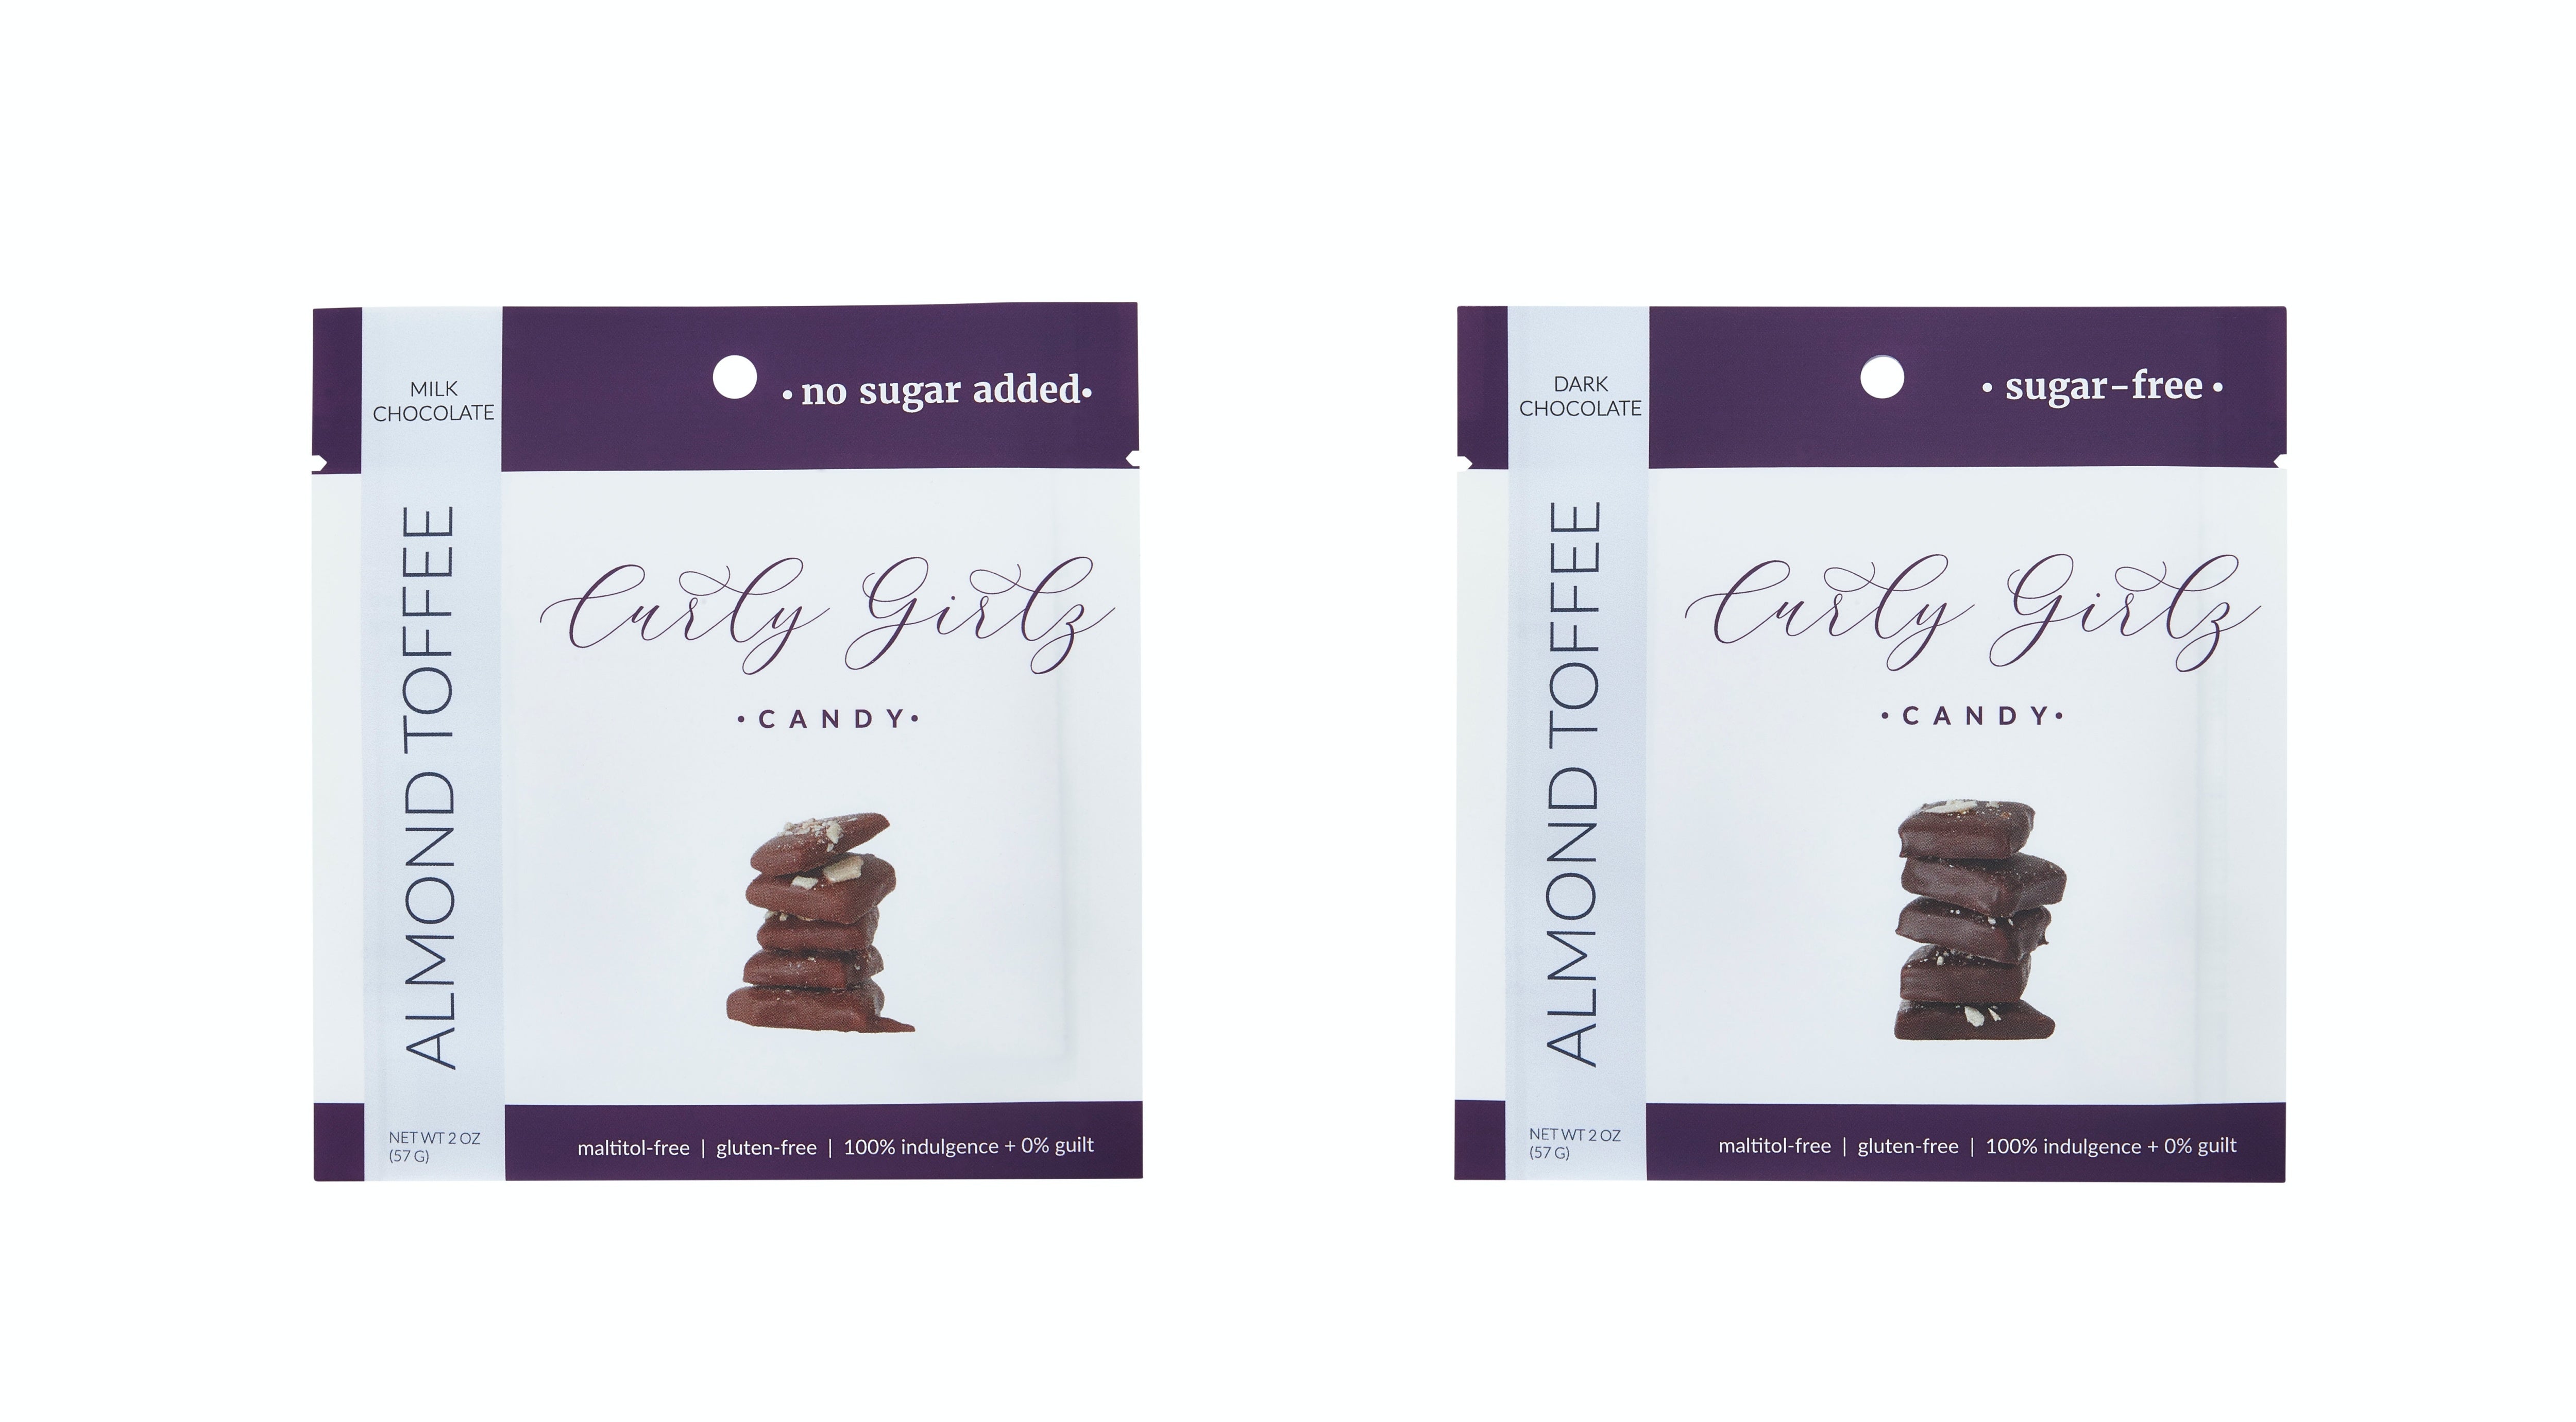 Sugar-Free Almond Toffee by Curly Girlz Candy - Variety Pack - High-quality Candies by Curly Girlz Candy at 